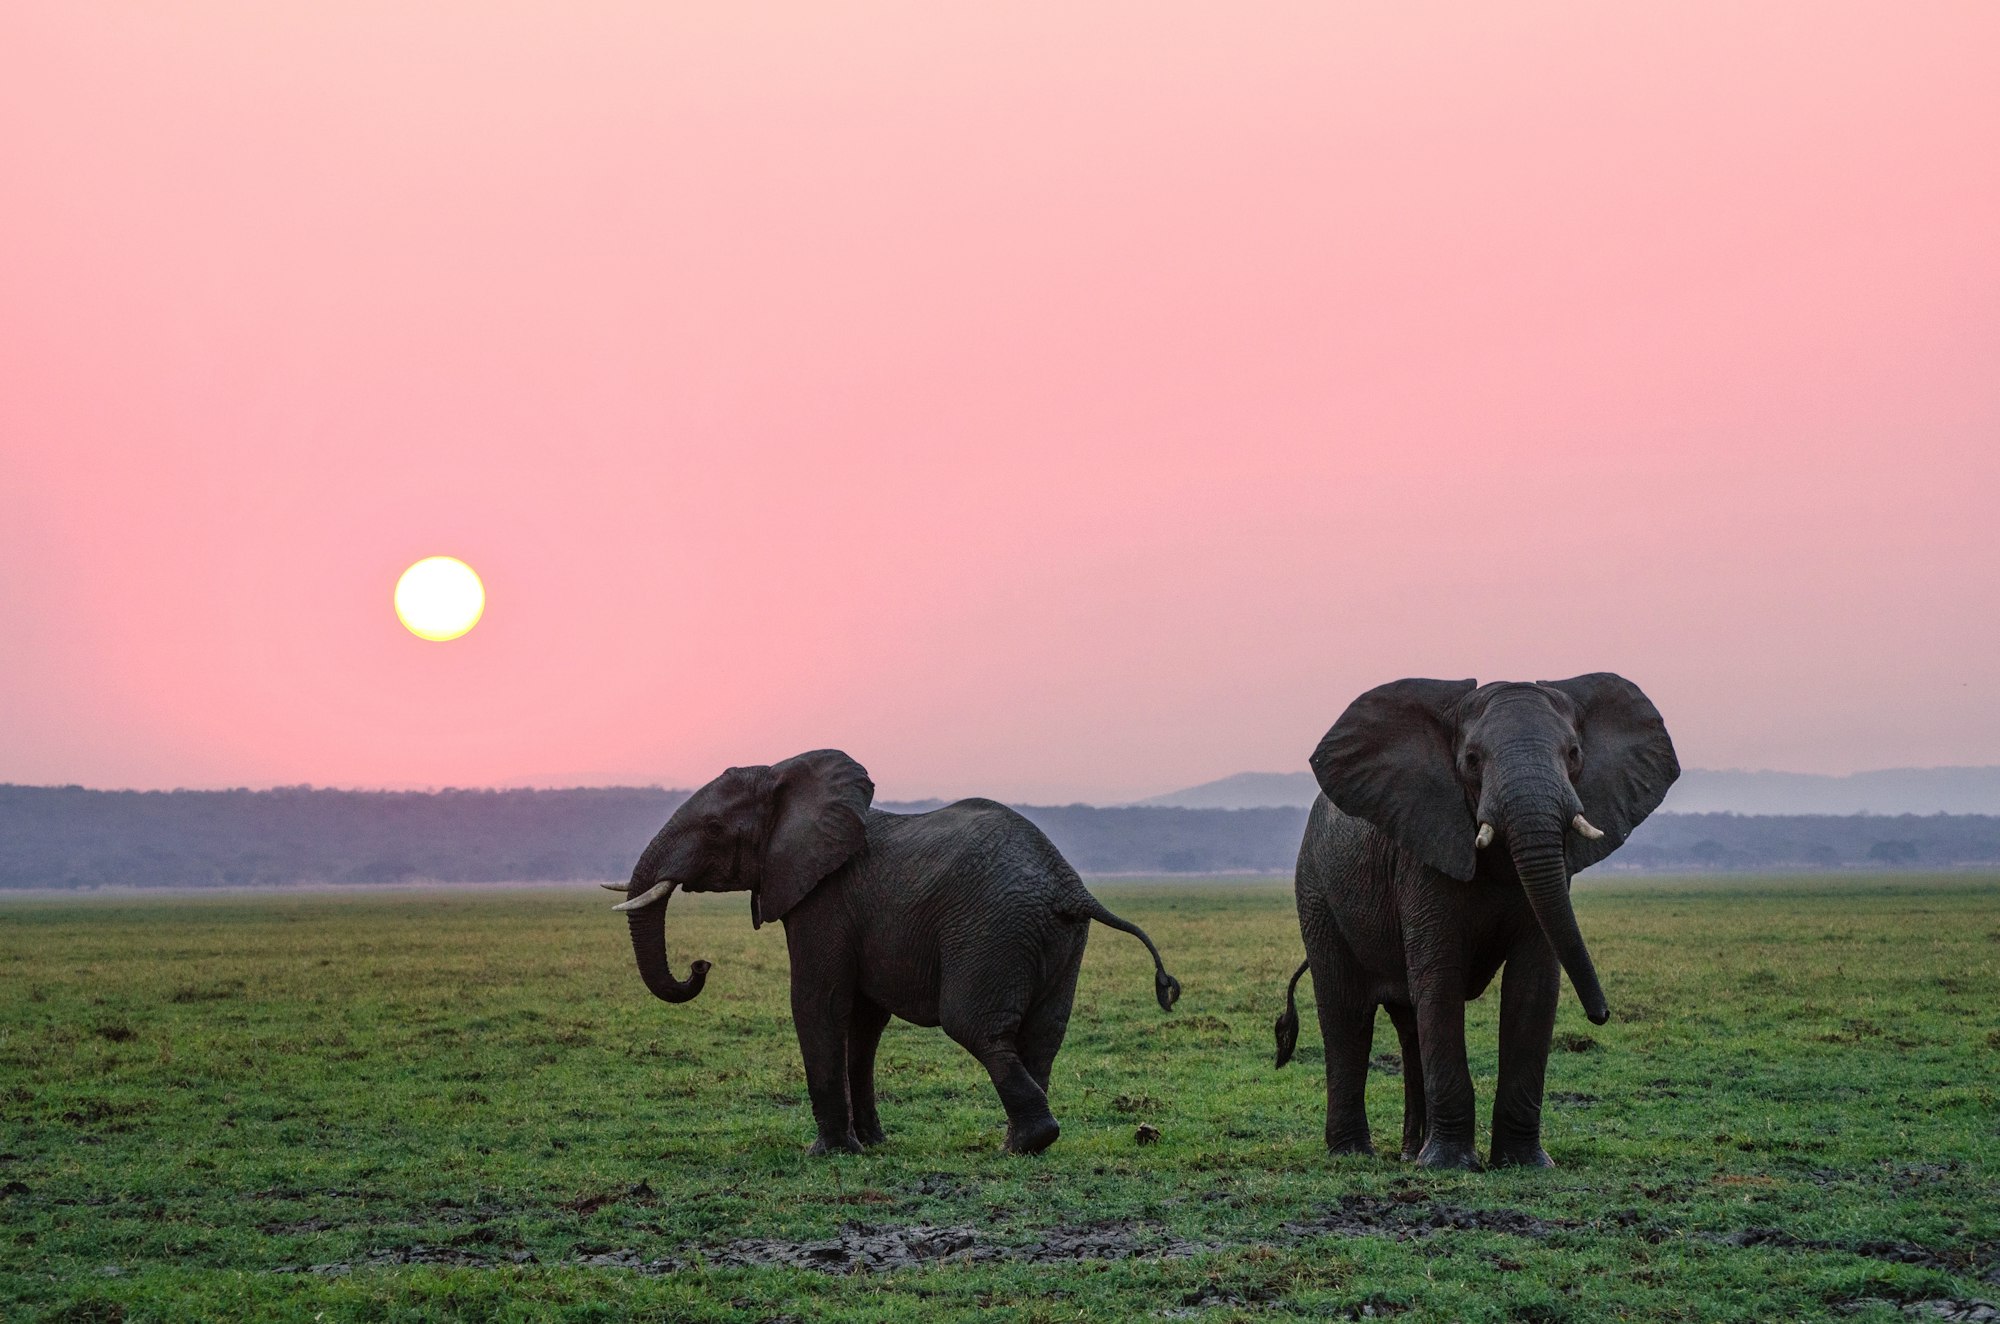 no. 88: elephant poaching has completely stopped in this Congolese national park